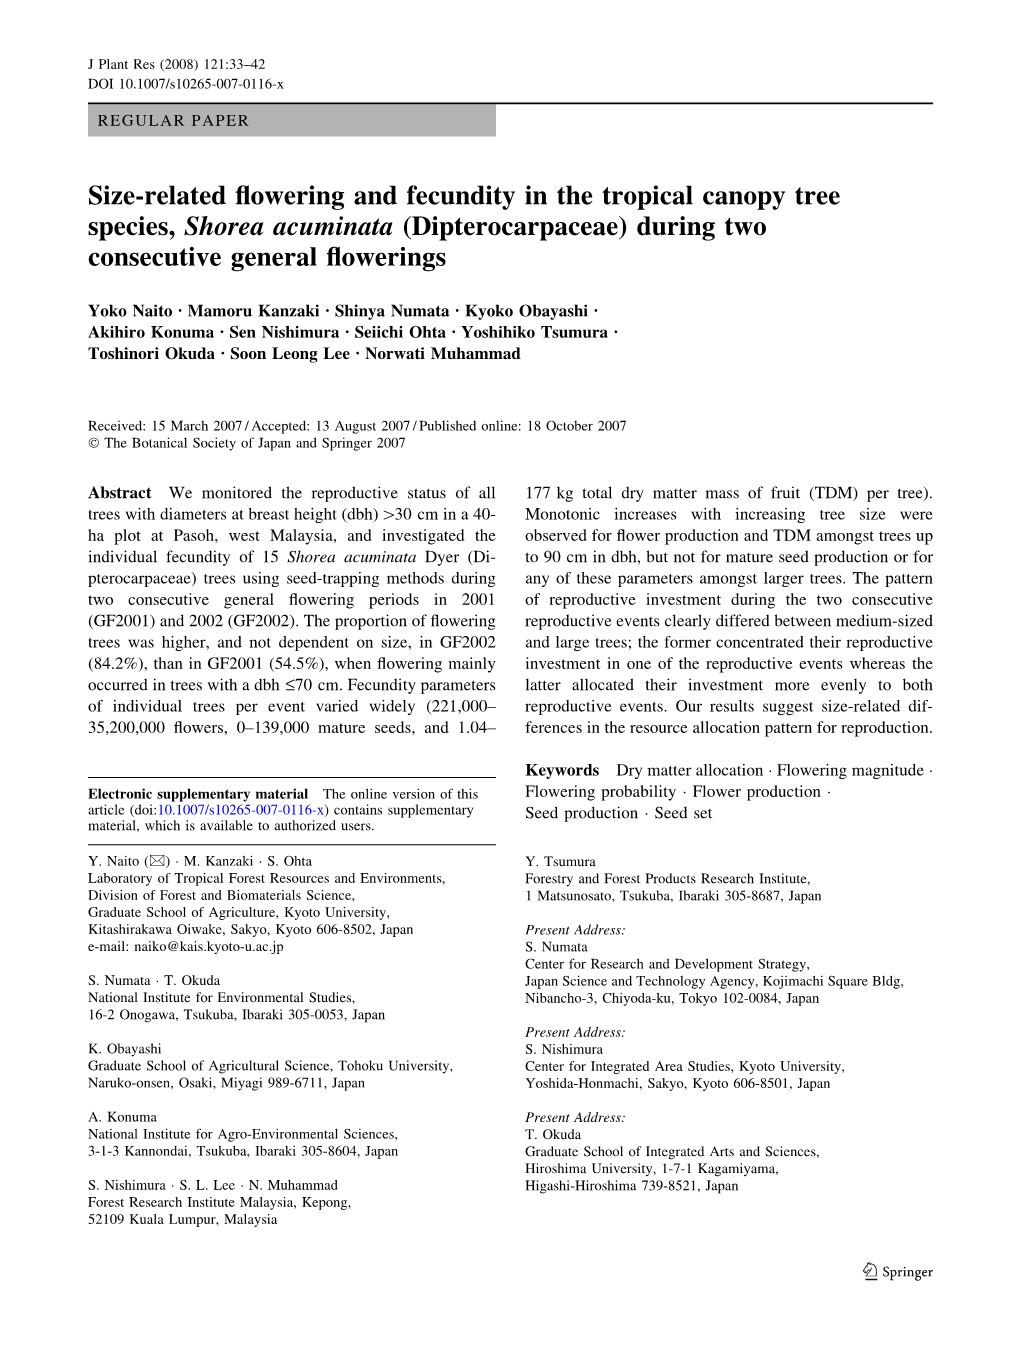 Size-Related Flowering and Fecundity in the Tropical Canopy Tree Species